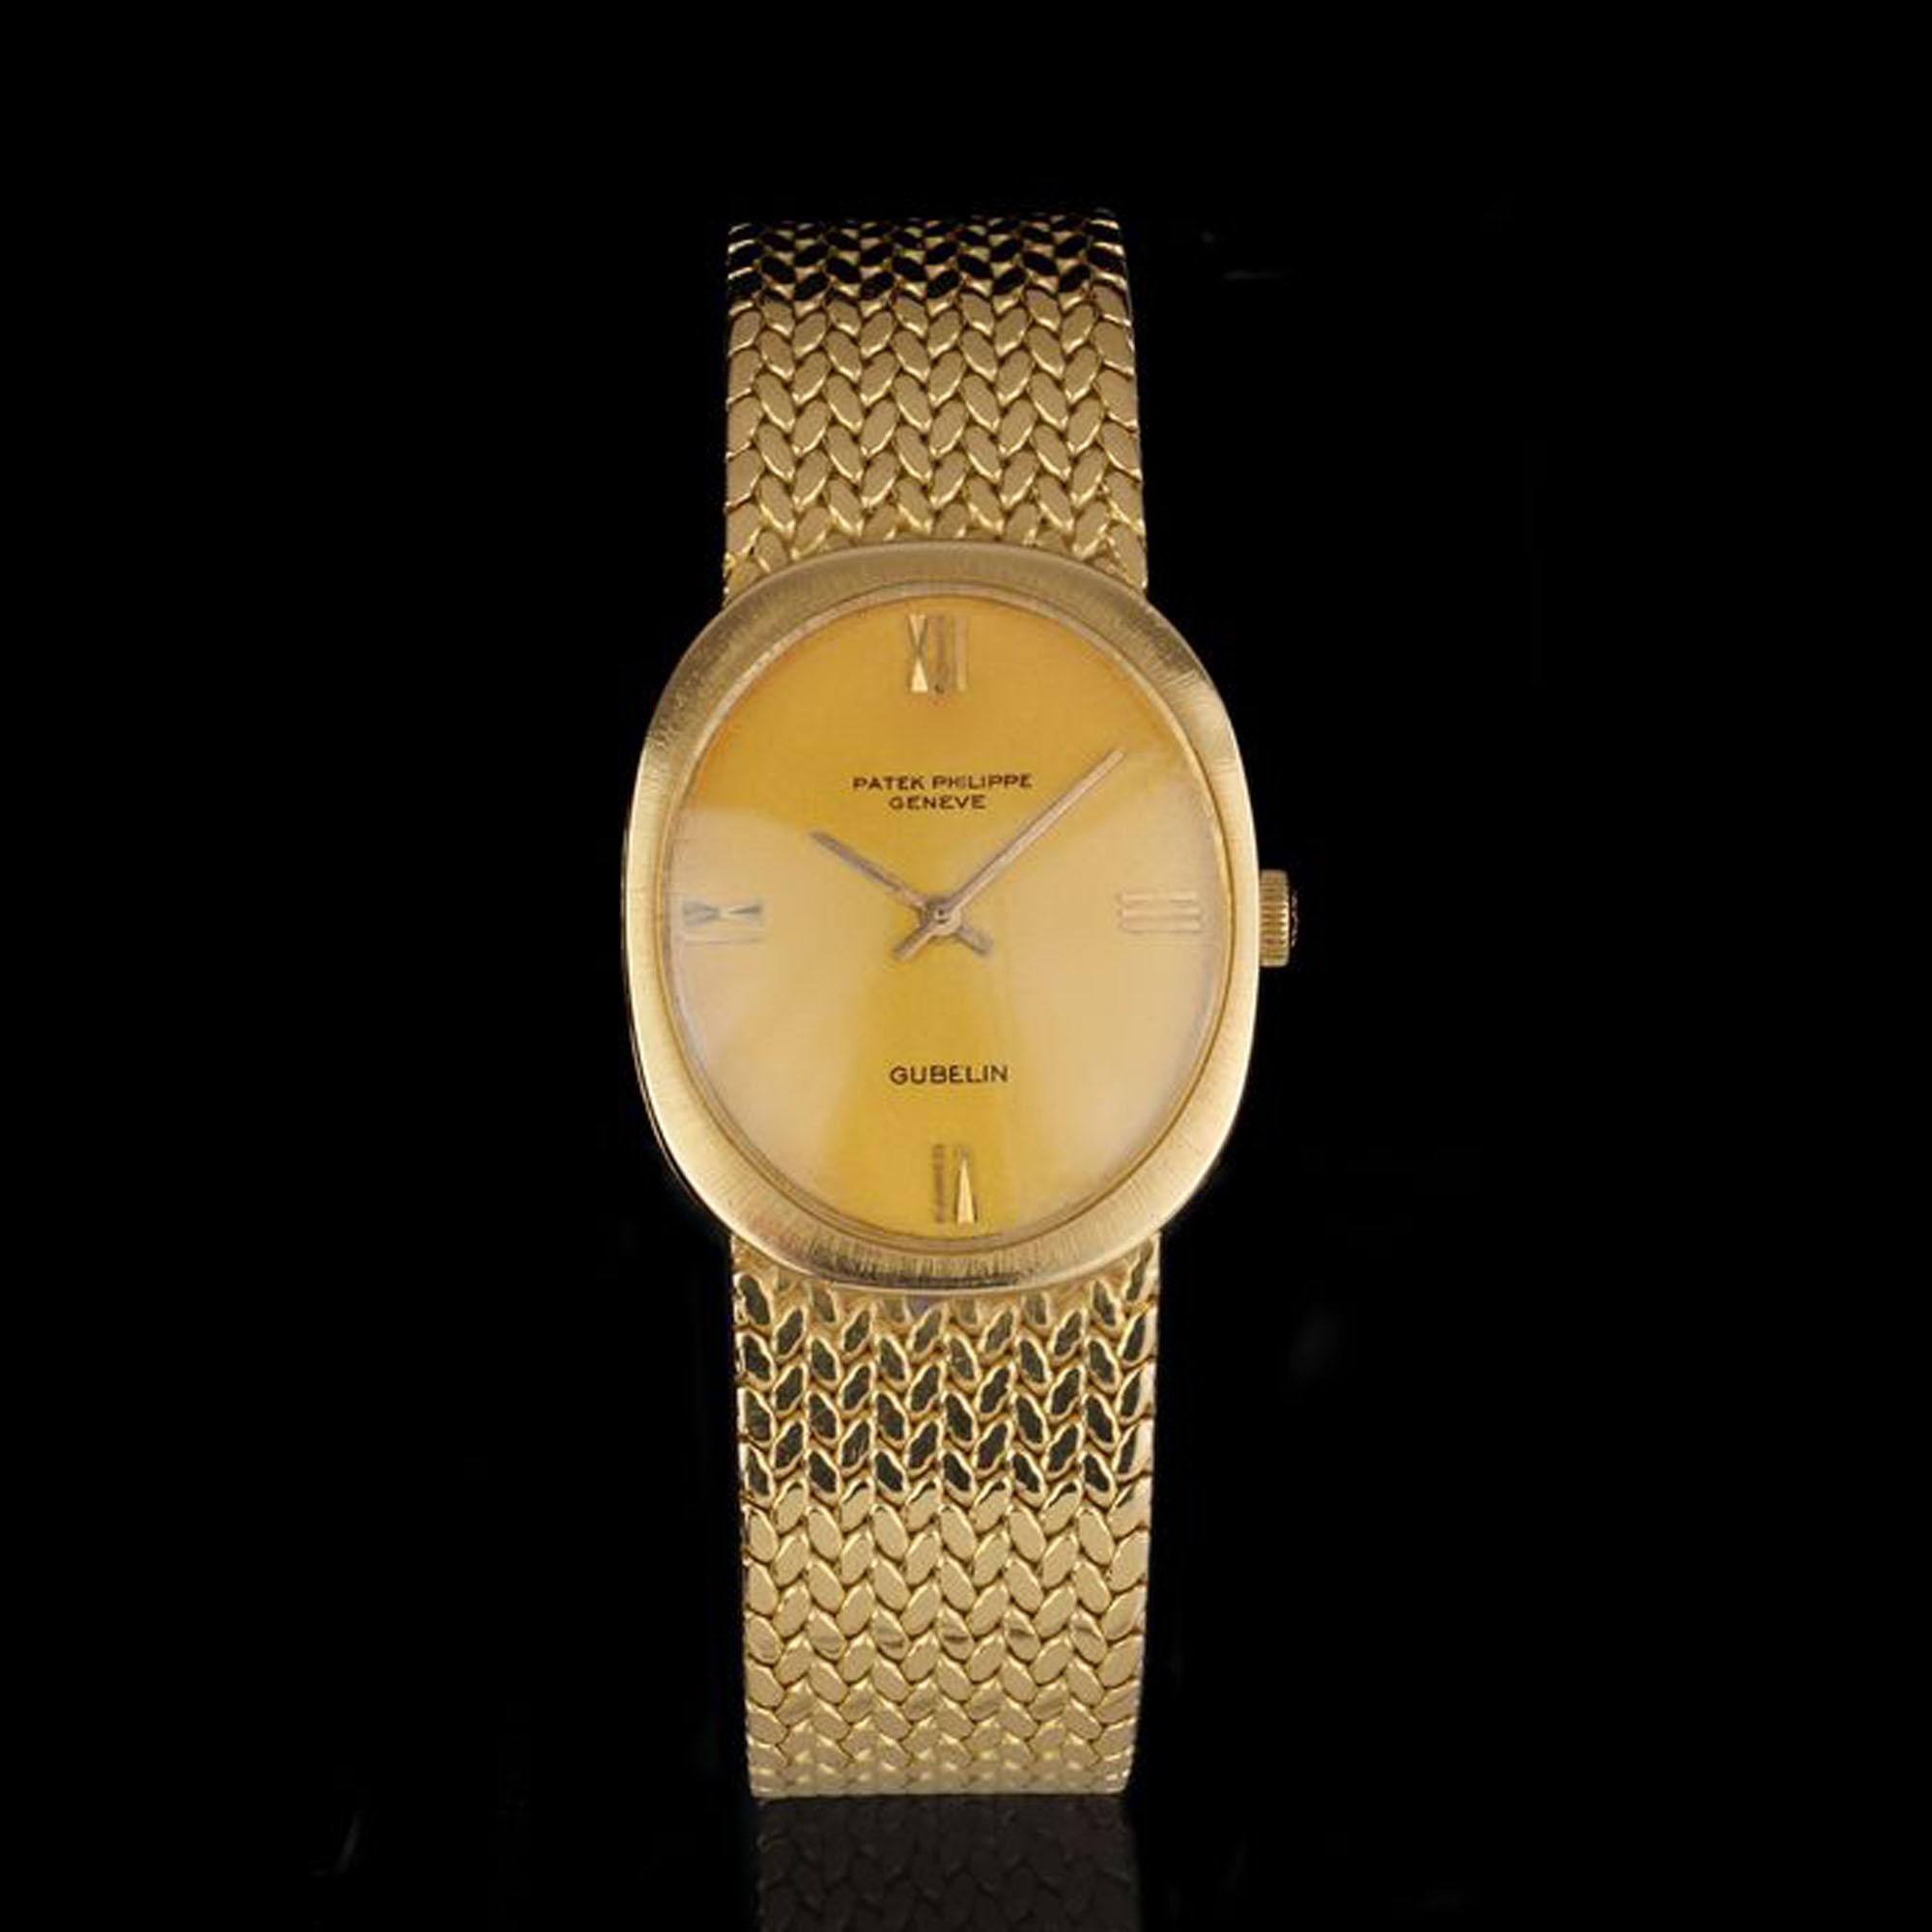 Patek Philippe Ellipse for Gubelin, 18kt gold manual winding mens wristwatch.
Made in 1972
Retailed by Gubelin. 

Complete with Patek Philippe box and archive papers.

Brand : PATEK PHILIPPE for Gubelin (Retailer)
Model : ELLIPSE REF 3584/1
Age :1